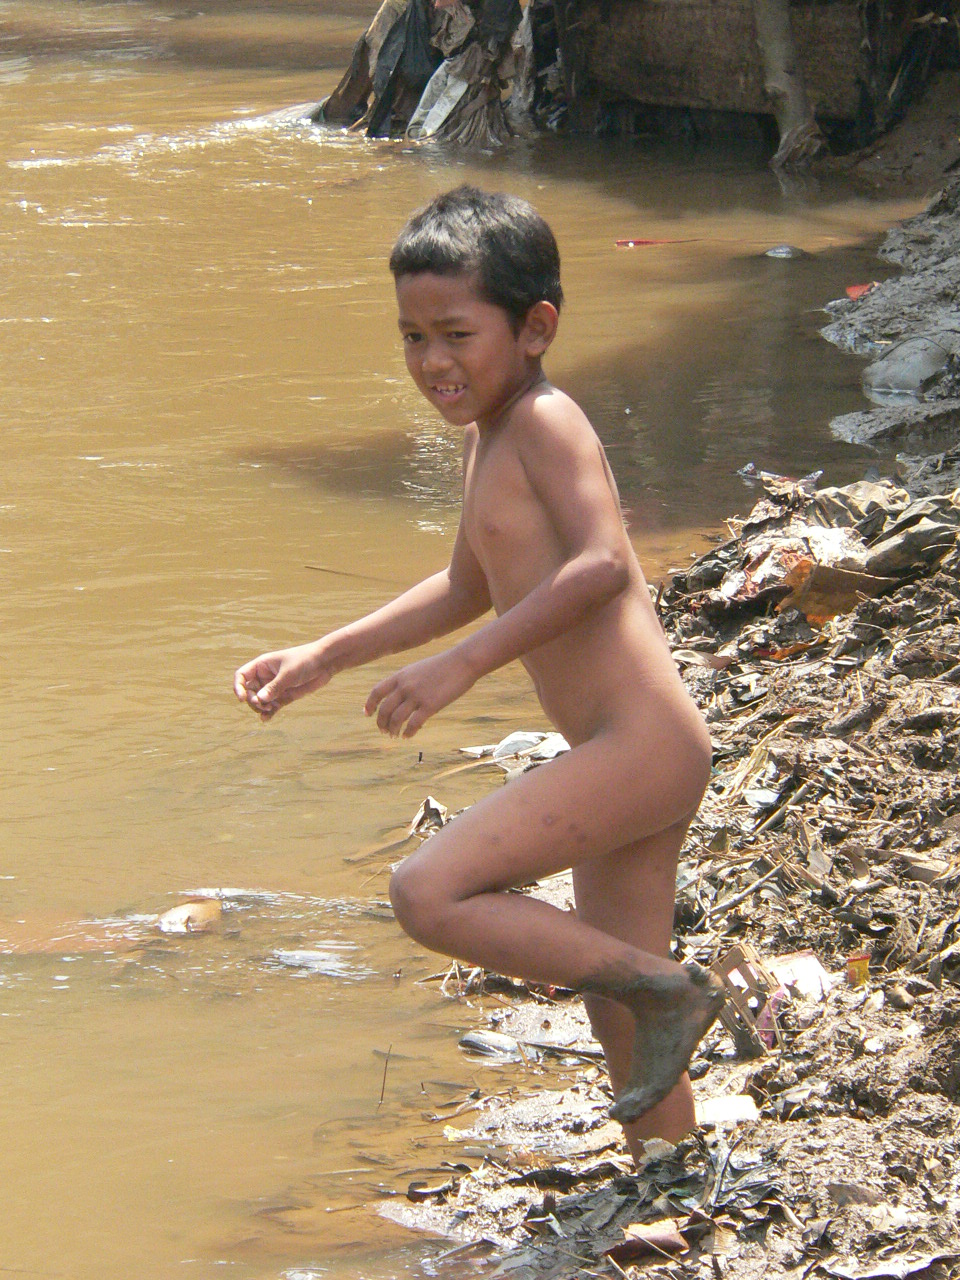 Young boy plays in Ciliwung River (Flickr, Mareta Kusumaningrum, March 25, 2009)